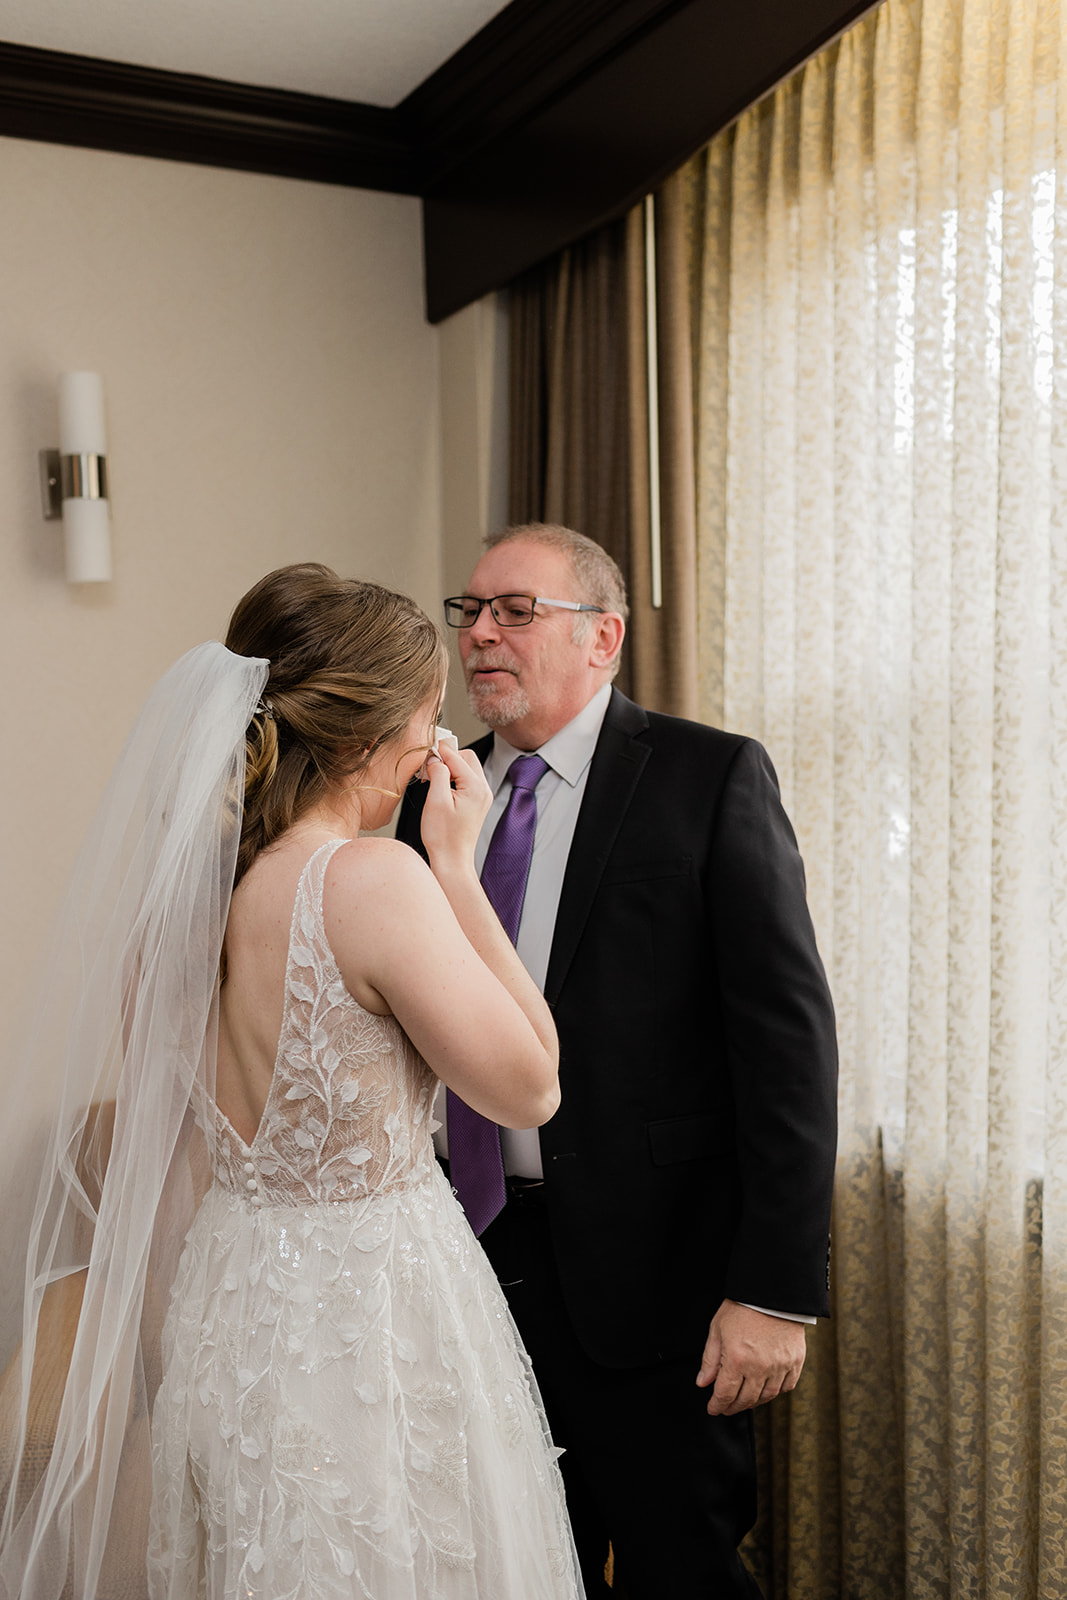 Father first look wedding photos Banff Alberta by Jess Collins 